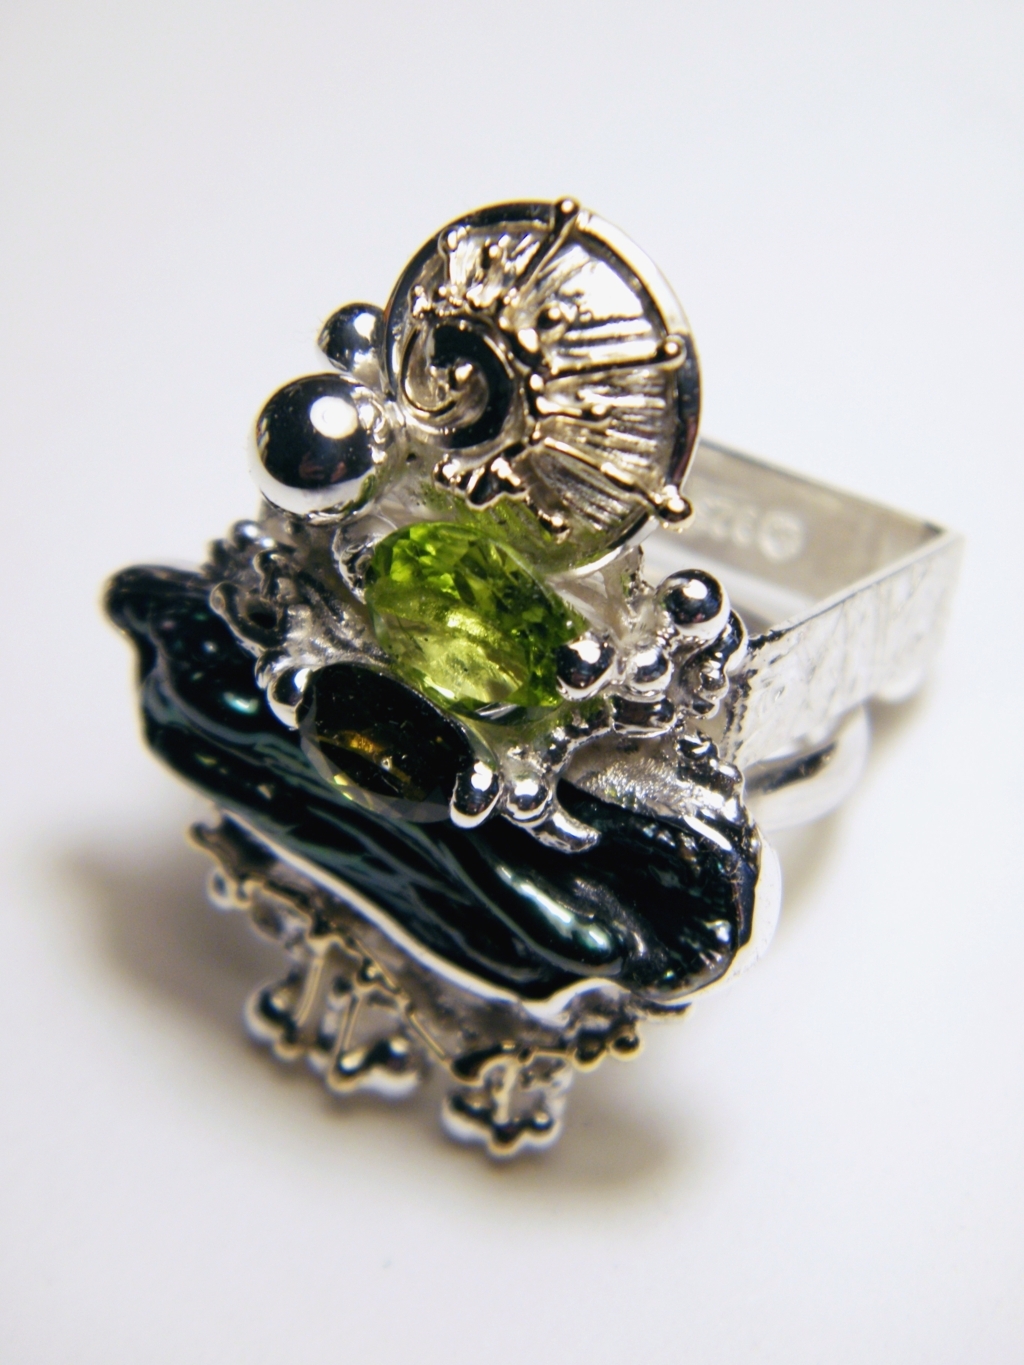 jewellery in art and craft galleries, jewellery and rings shown in international jewellery shows and fairs, one of a kind rings handmade by artist, gregory pyra piro one of a kind square ring #1080, square ring with green tourmaline and peridot, one of a kind ring handmade by artist with green tourmaline and biwa pearl